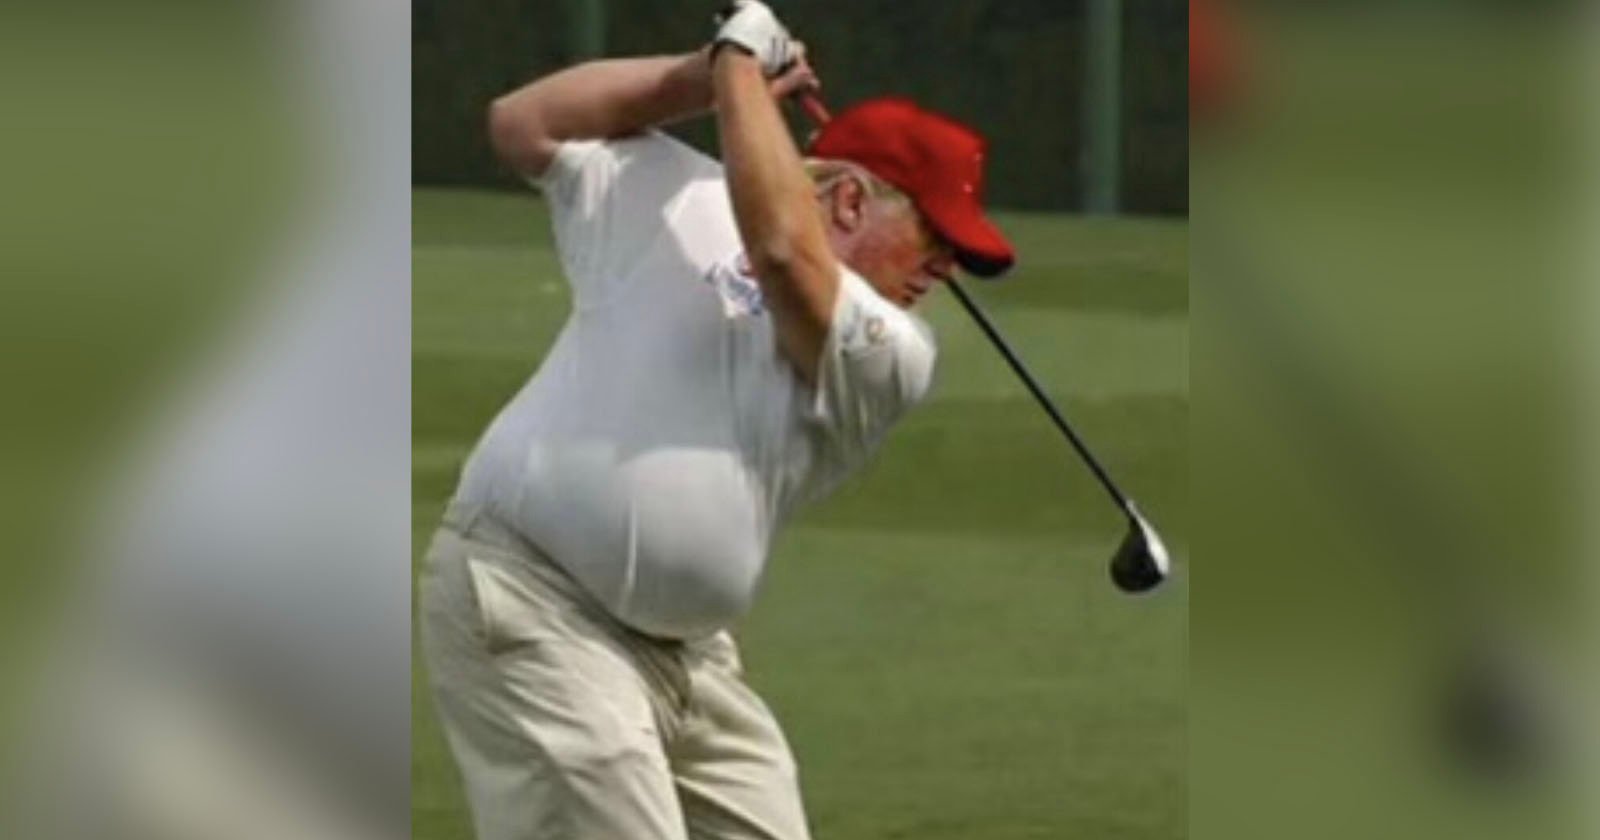  trump claims unflattering image him playing golf was 